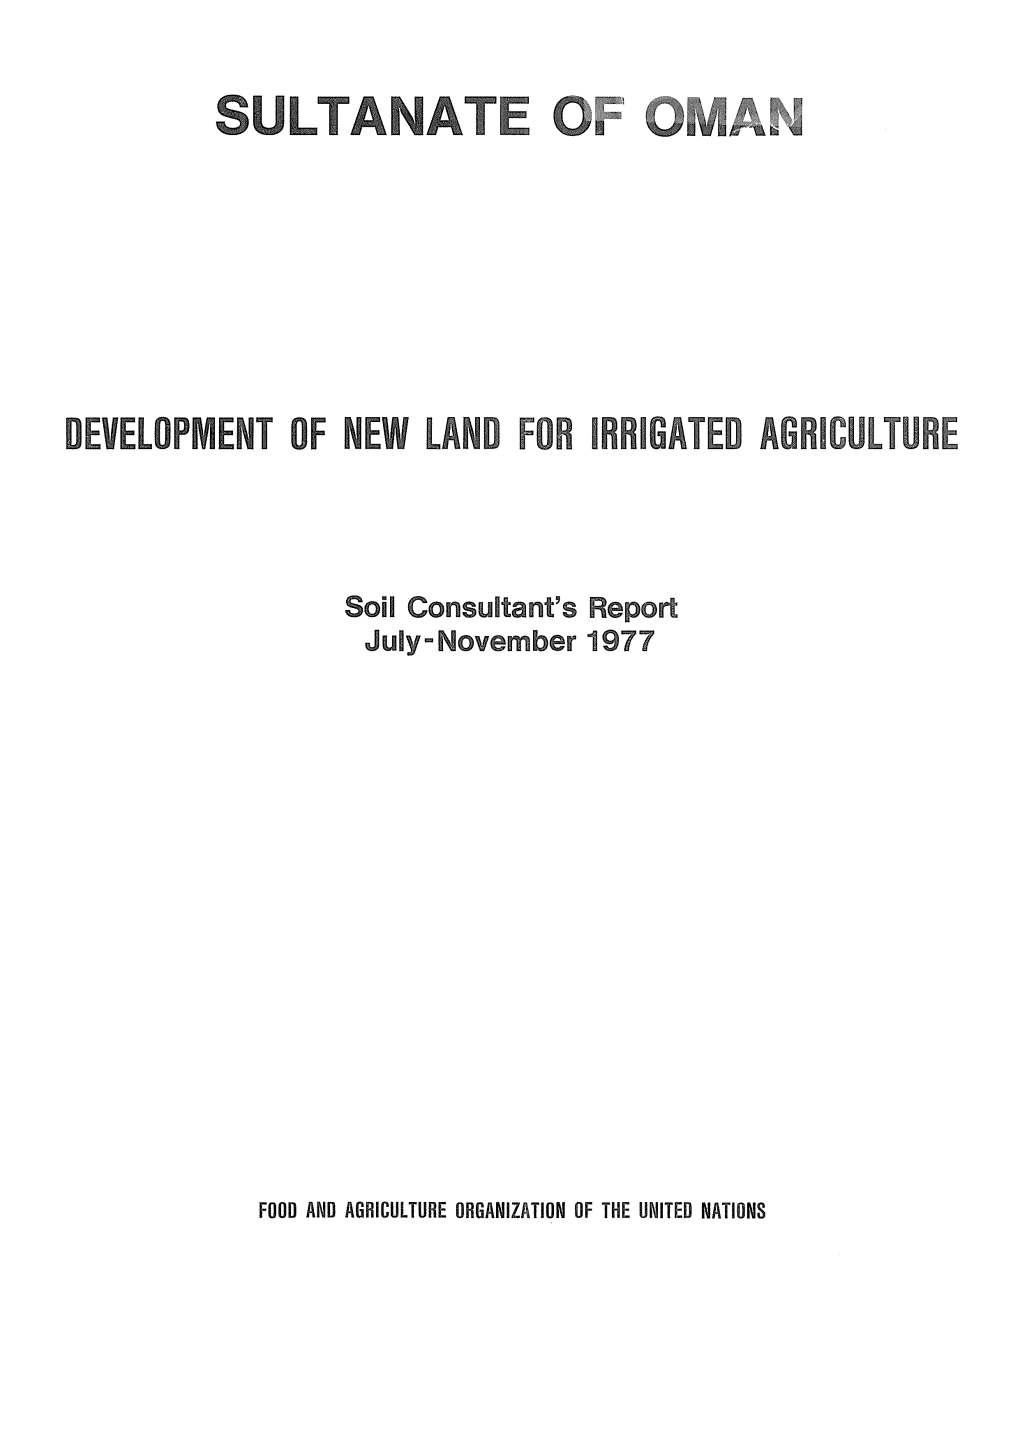 Development of New Land for Irrigated Agriculture in Oman. Soil